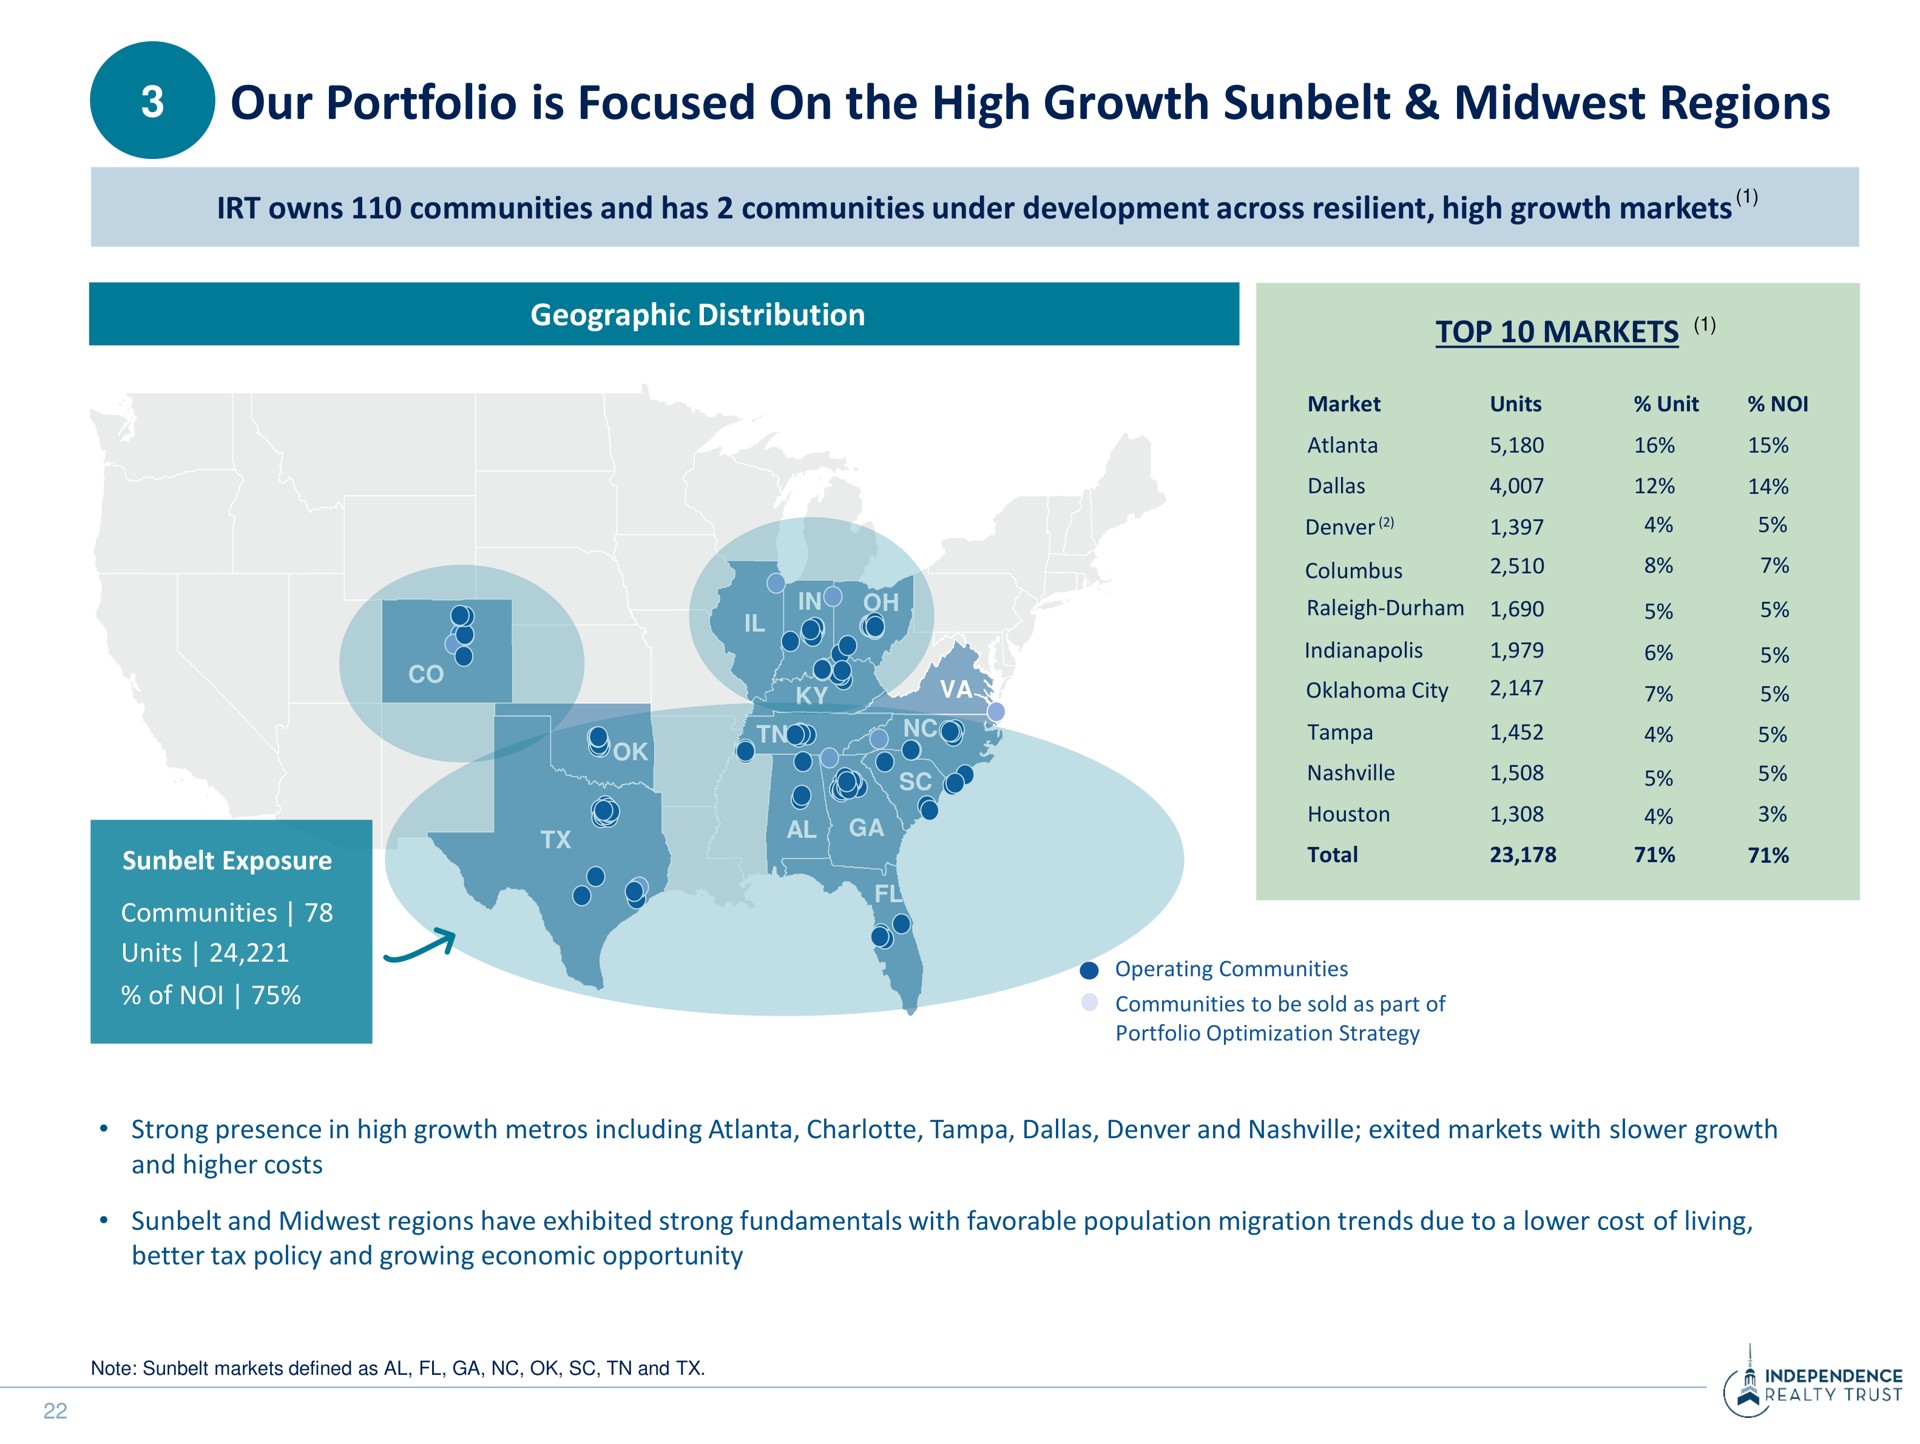 our portfolio is focused on the high growth regions portfolio summary | Independence Realty Trust